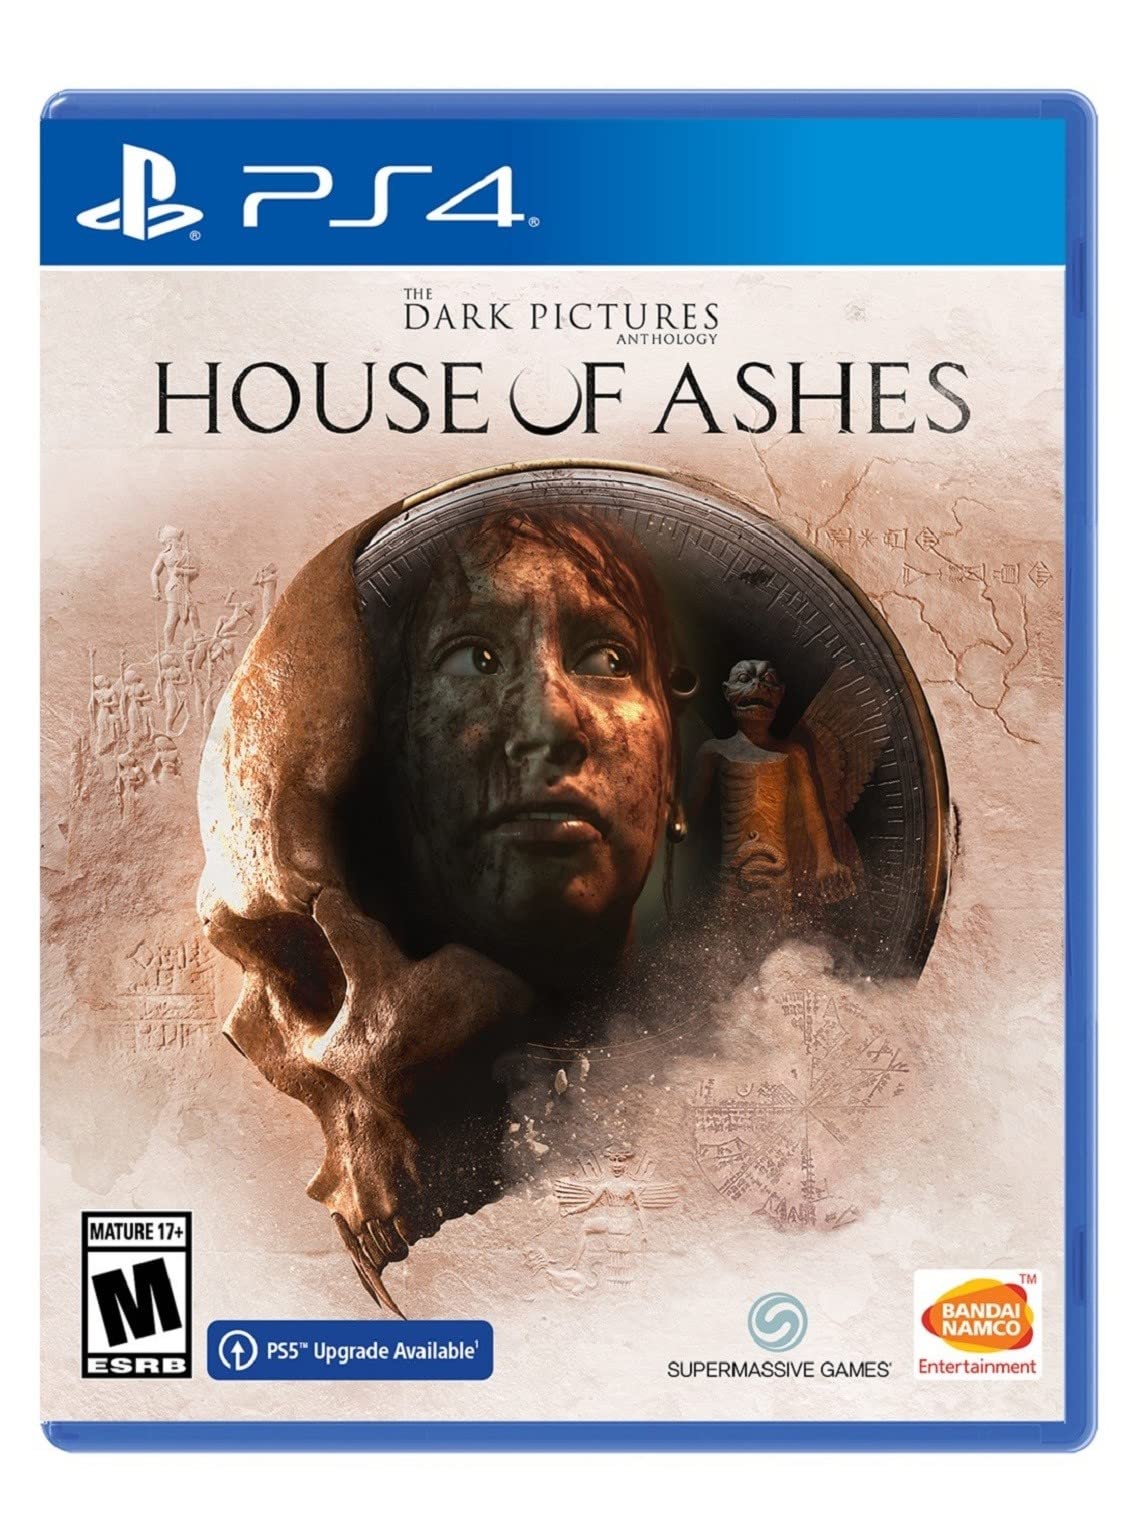 The Dark Pictures Anthology: House of Ashes (PS4) $8.49